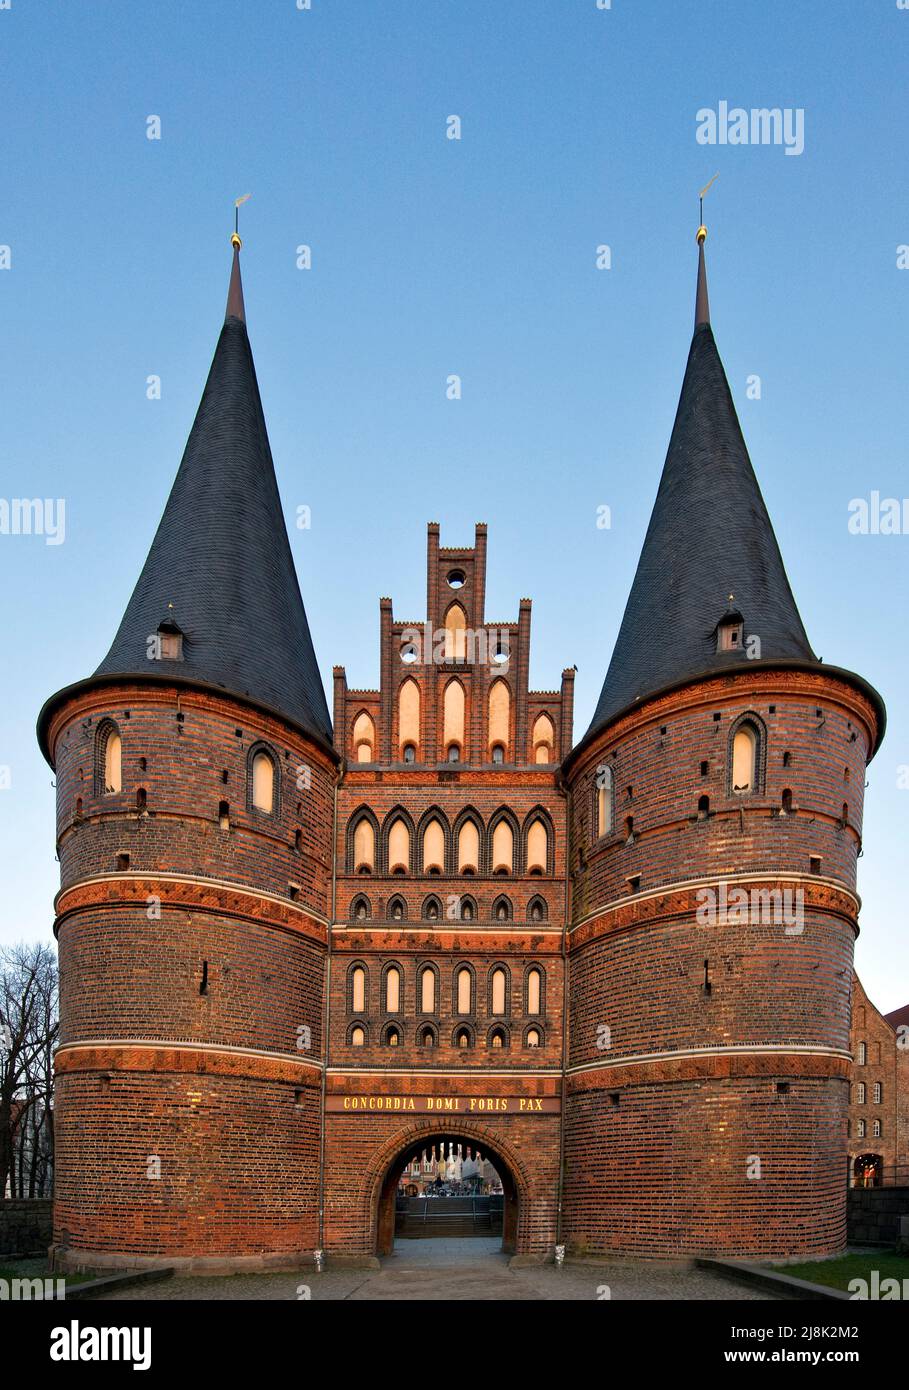 Holstentor, former western town gate, part of the UNESCO cultural heritage Luebecker Altstadt, Germany, Schleswig-Holstein, Luebeck Stock Photo